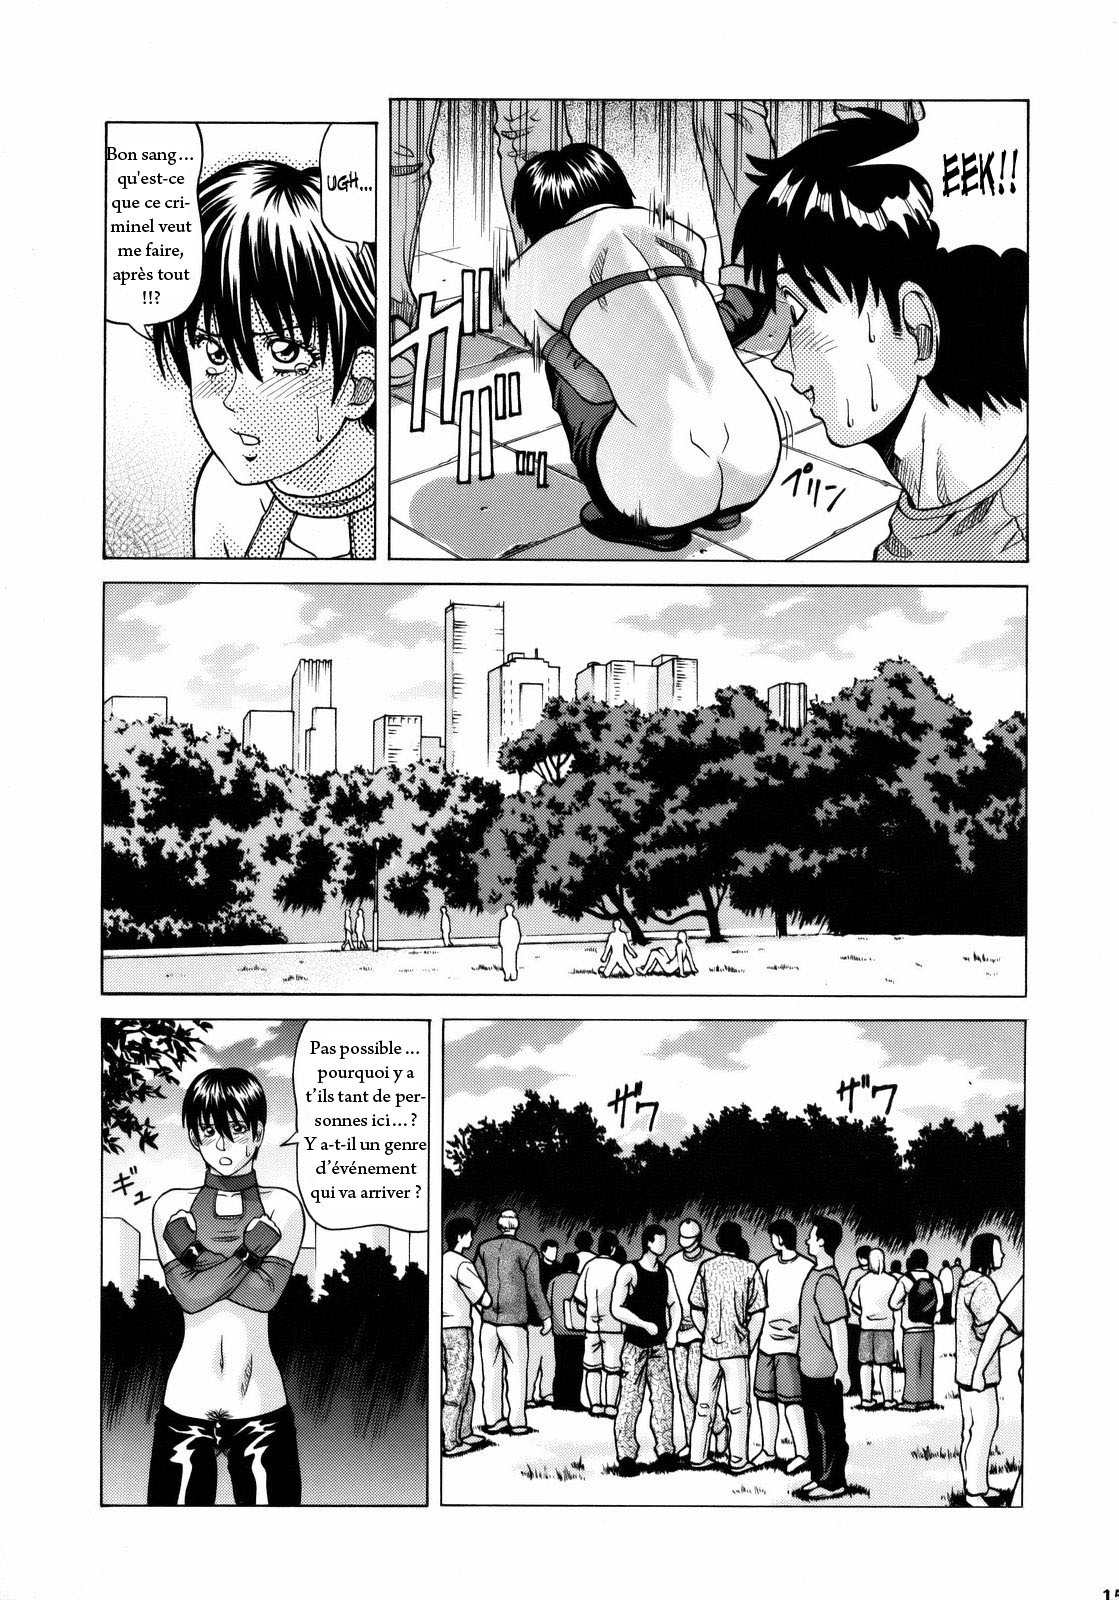 (C75) [Human High-Light Film (Jacky Knee-san)] Rebecca Chambers (Resident Evil) [French] page 14 full